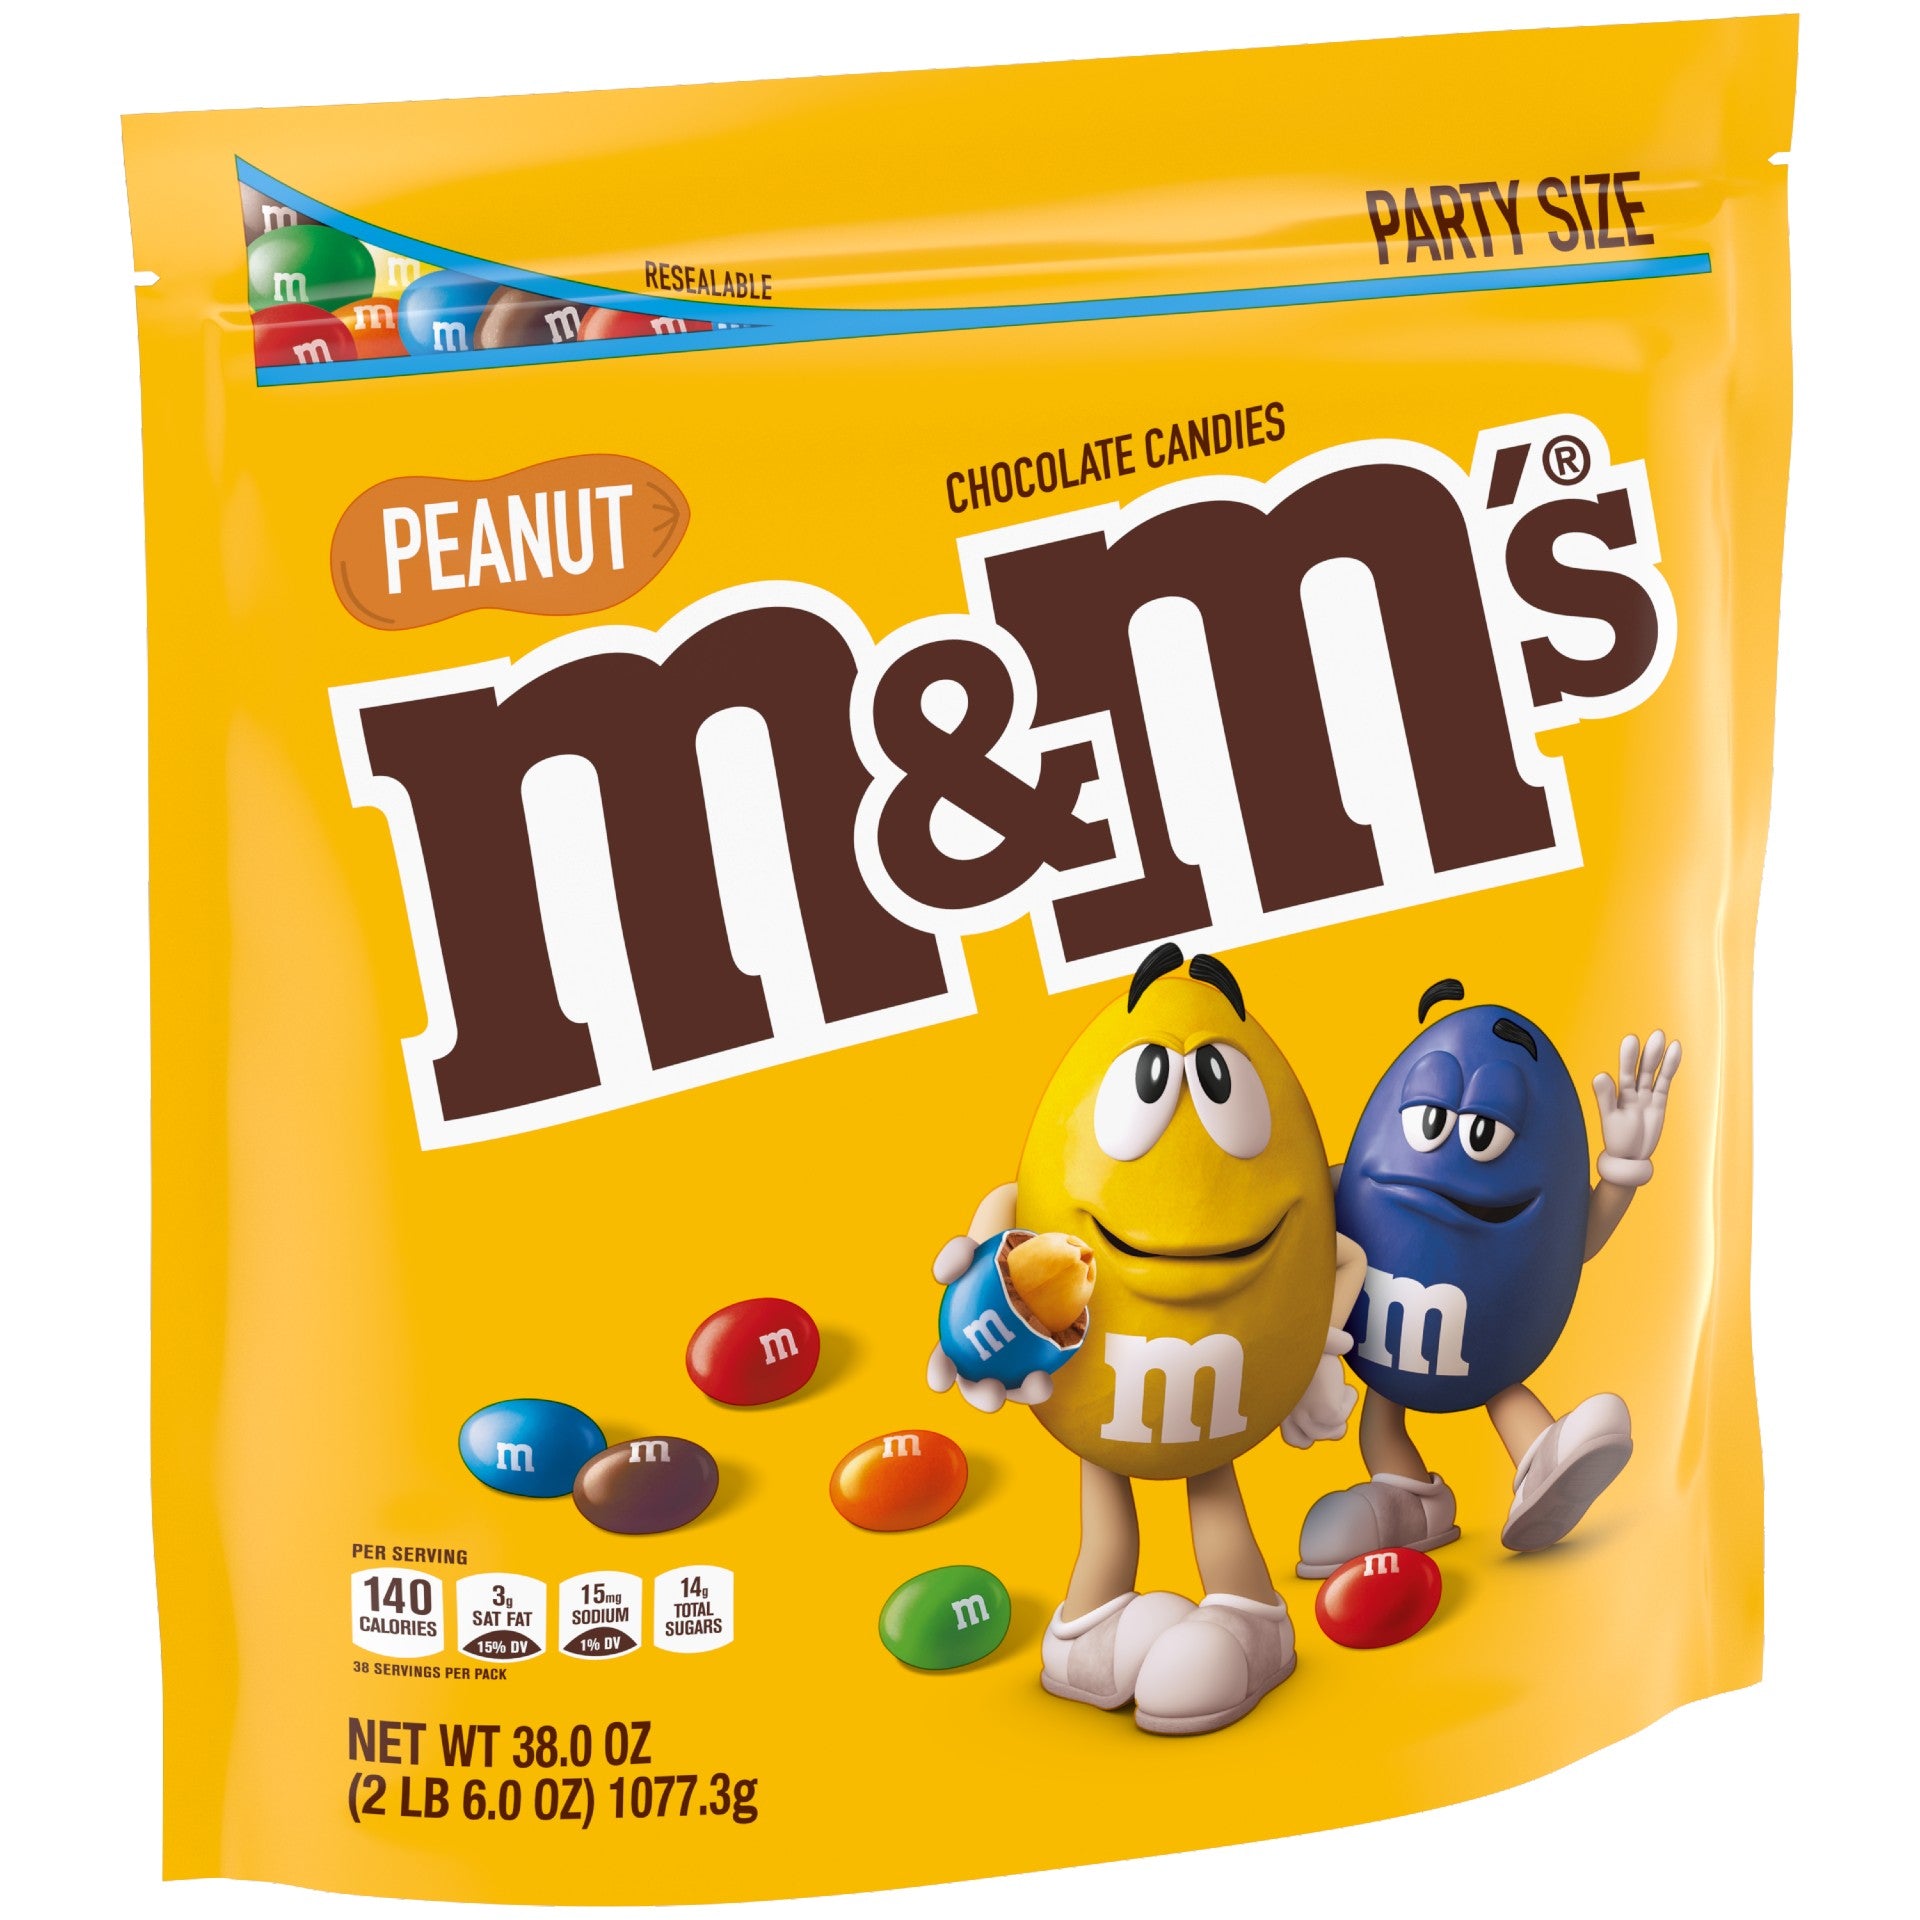 pack of m&ms